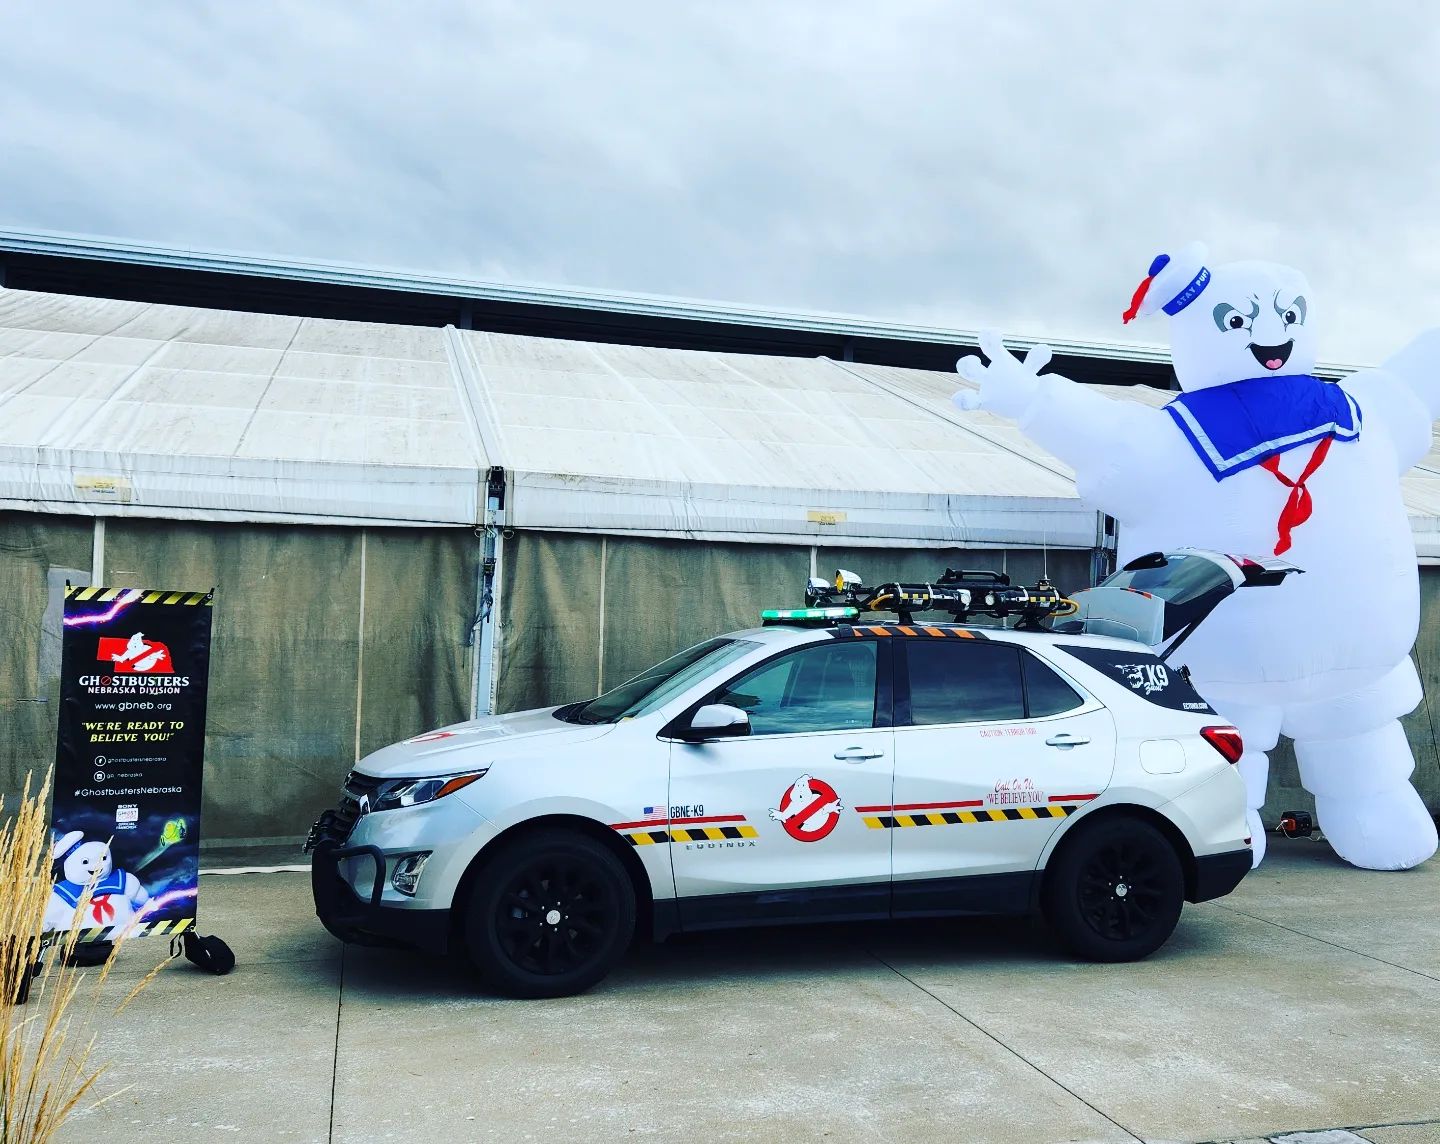 The EctoK9 Unit setup for an event and ready to bust the giant inflatable Stay Puft Marshmallow Man parked behind it.